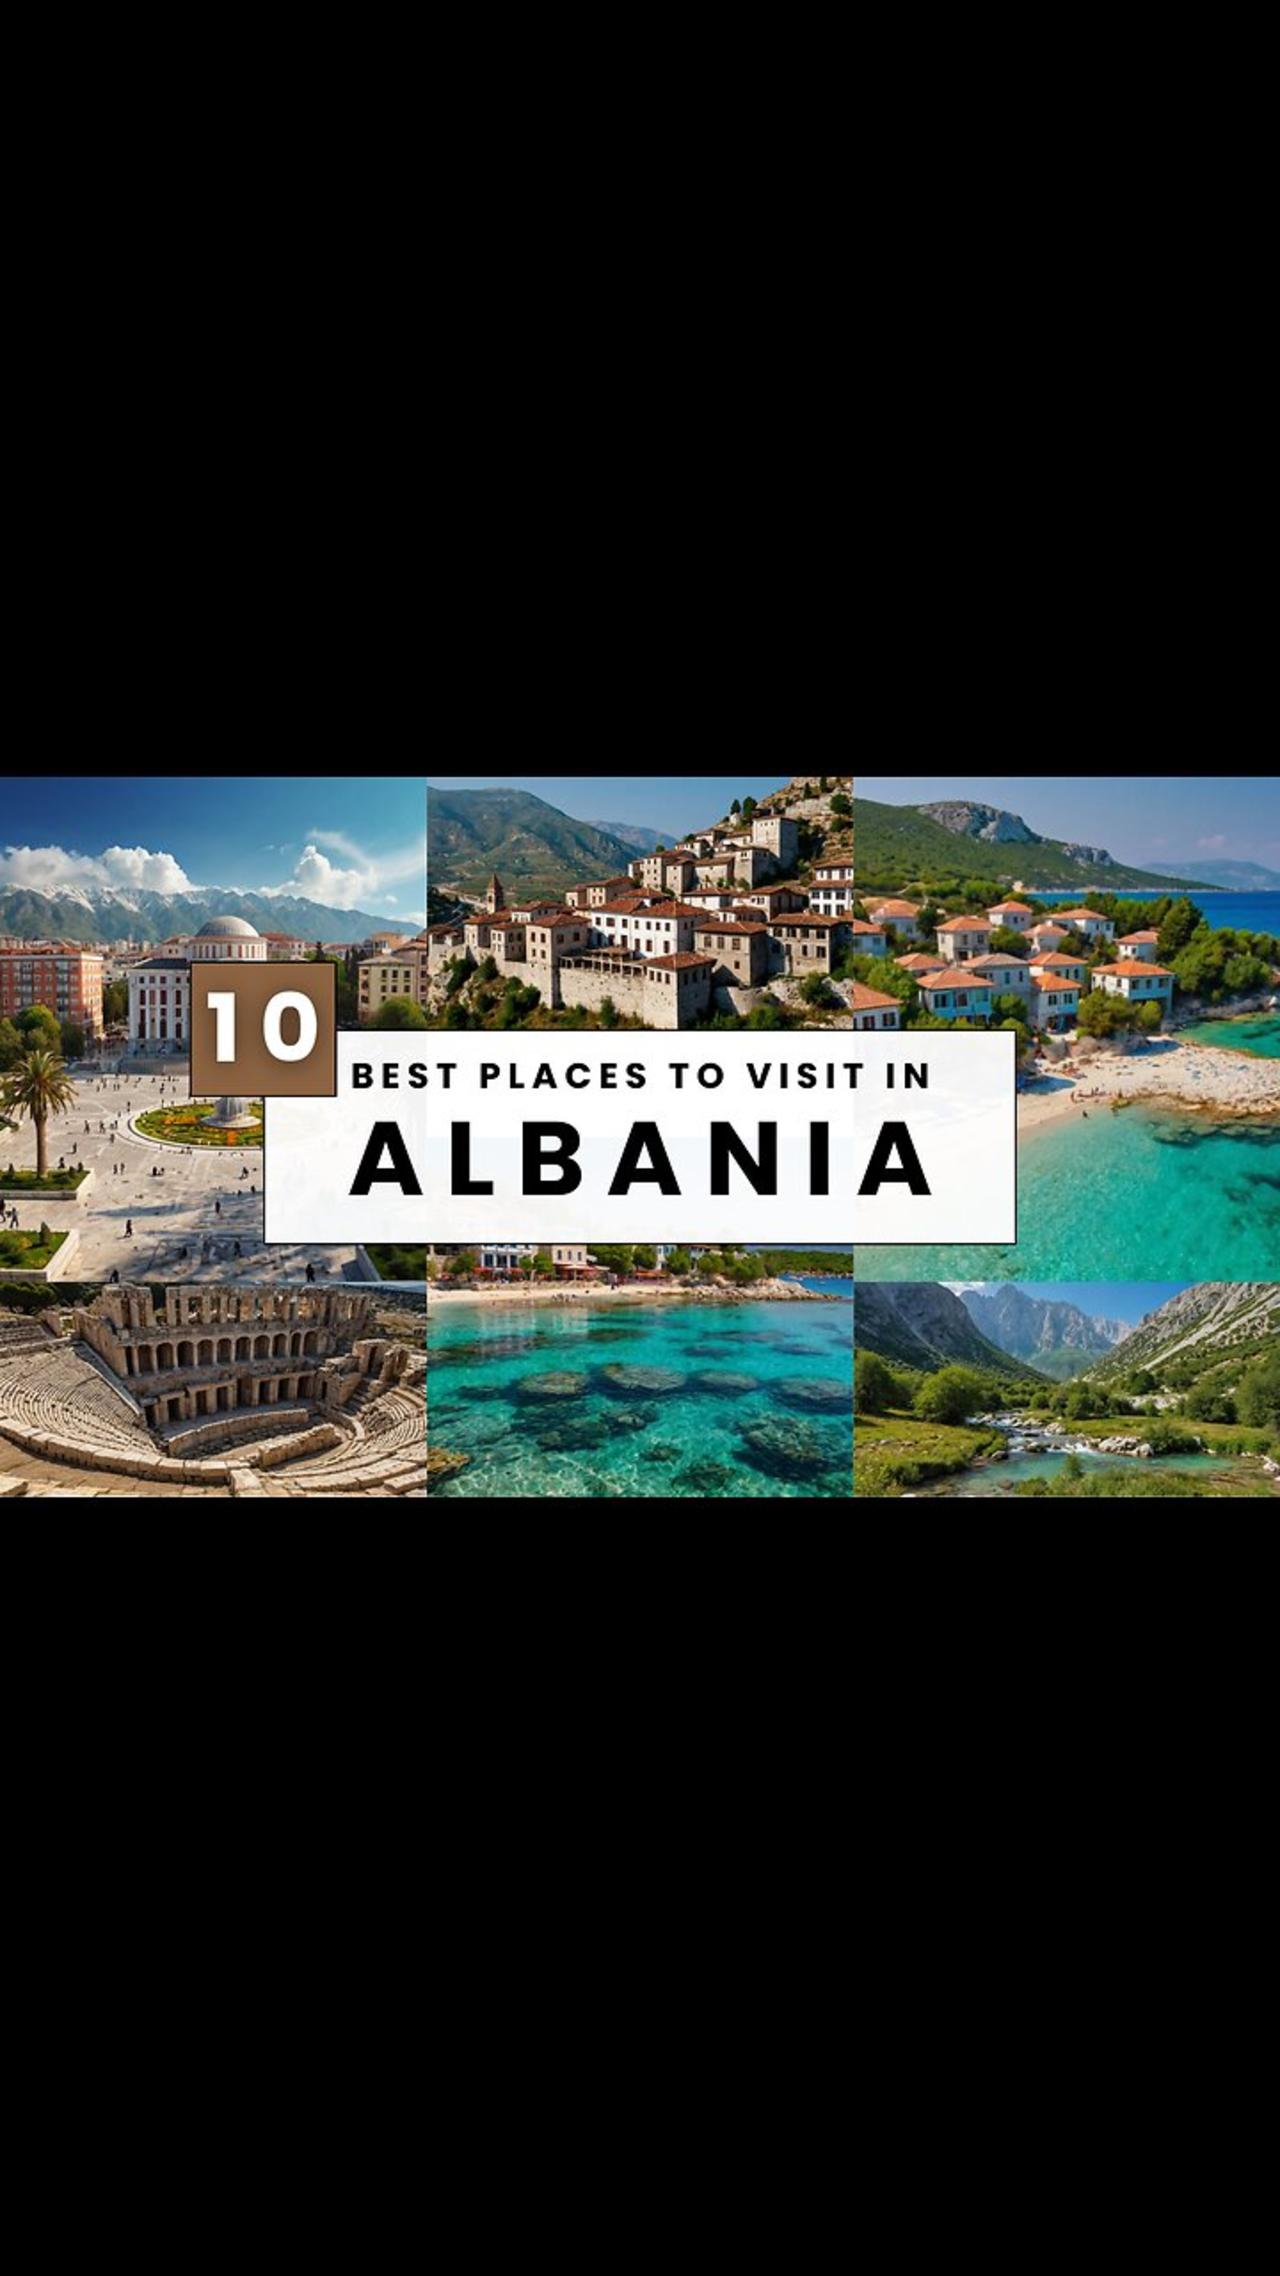 10 Best Places to visit in Albania